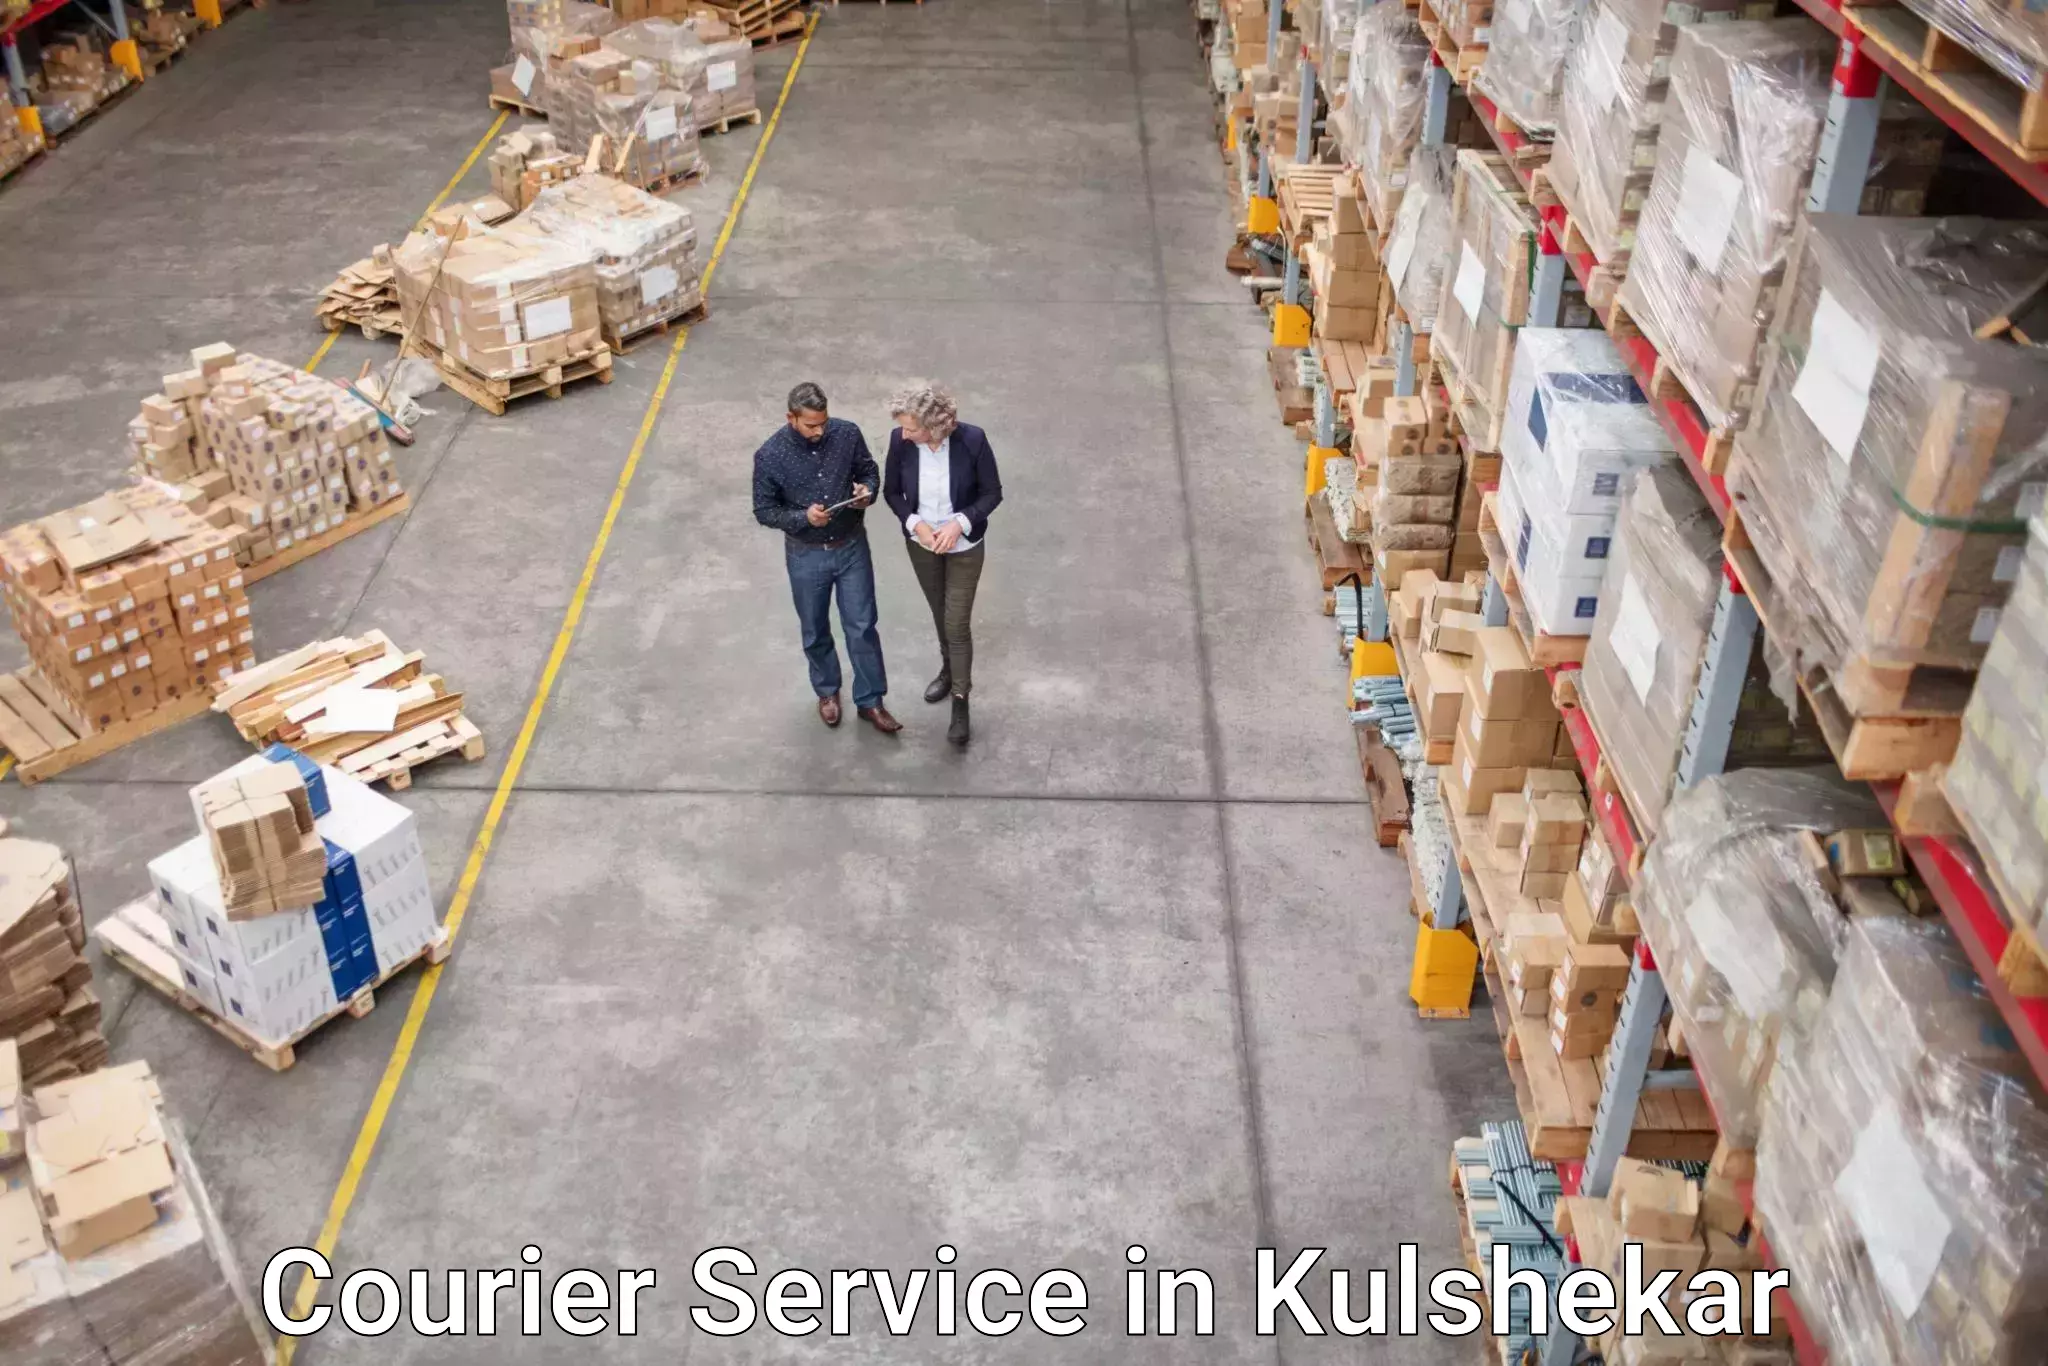 Courier services in Kulshekar